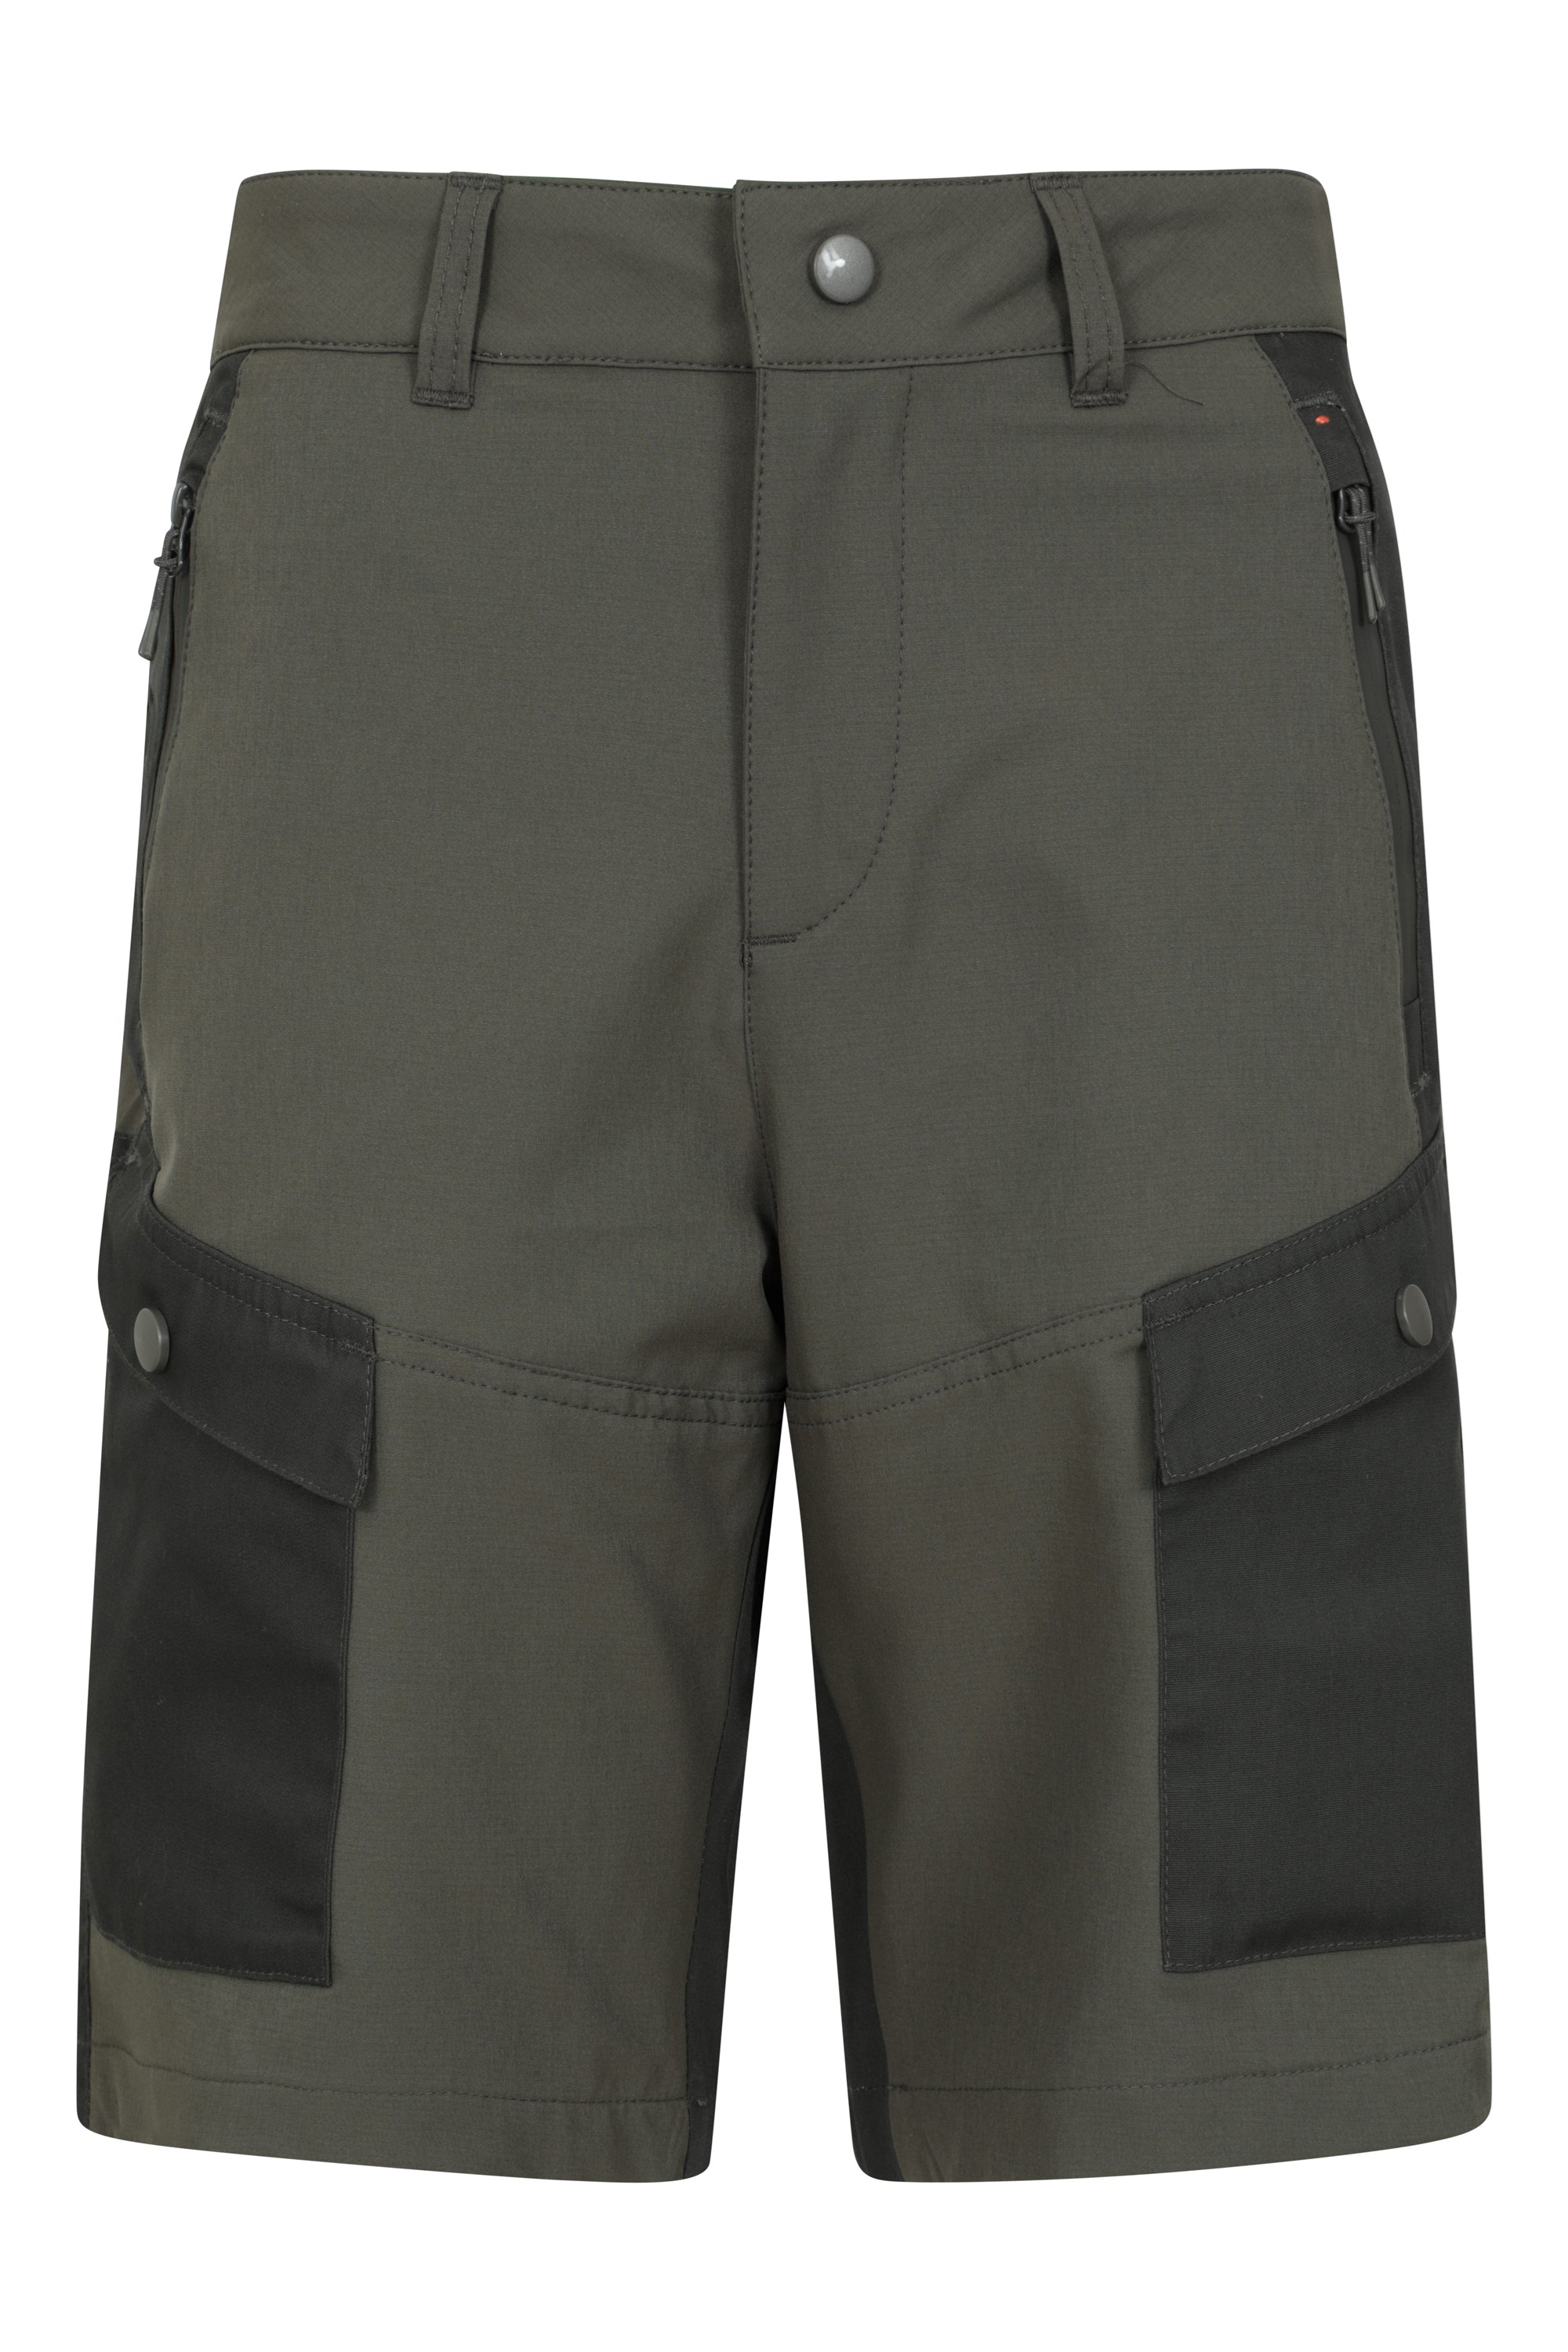 Expedition Hybrid Womens Shorts Green